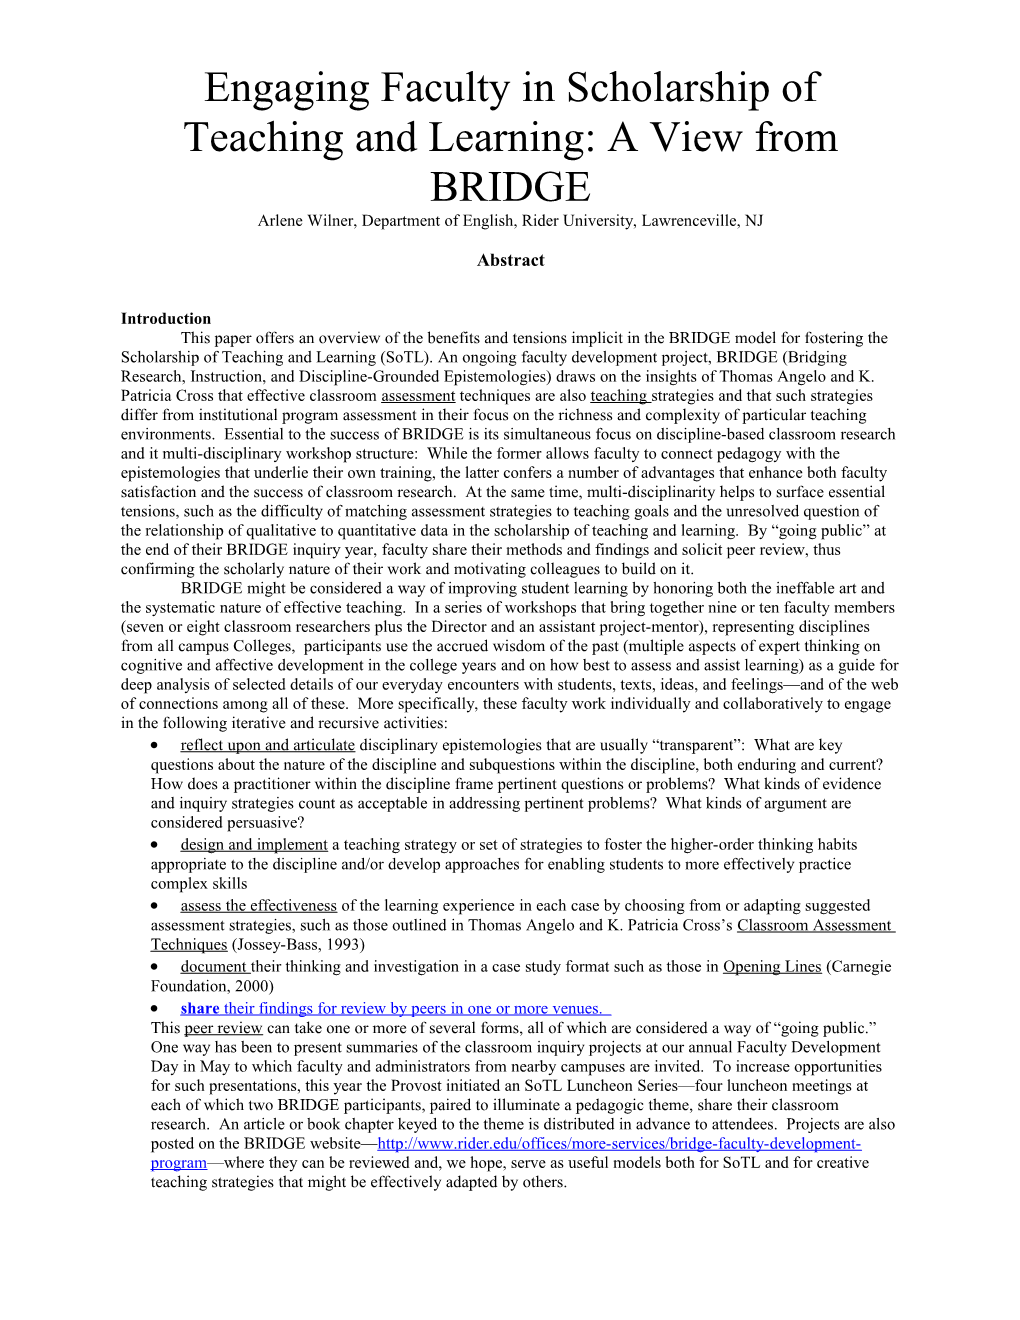 Engaging Faculty in Scholarship of Teaching and Learning: a View from BRIDGE